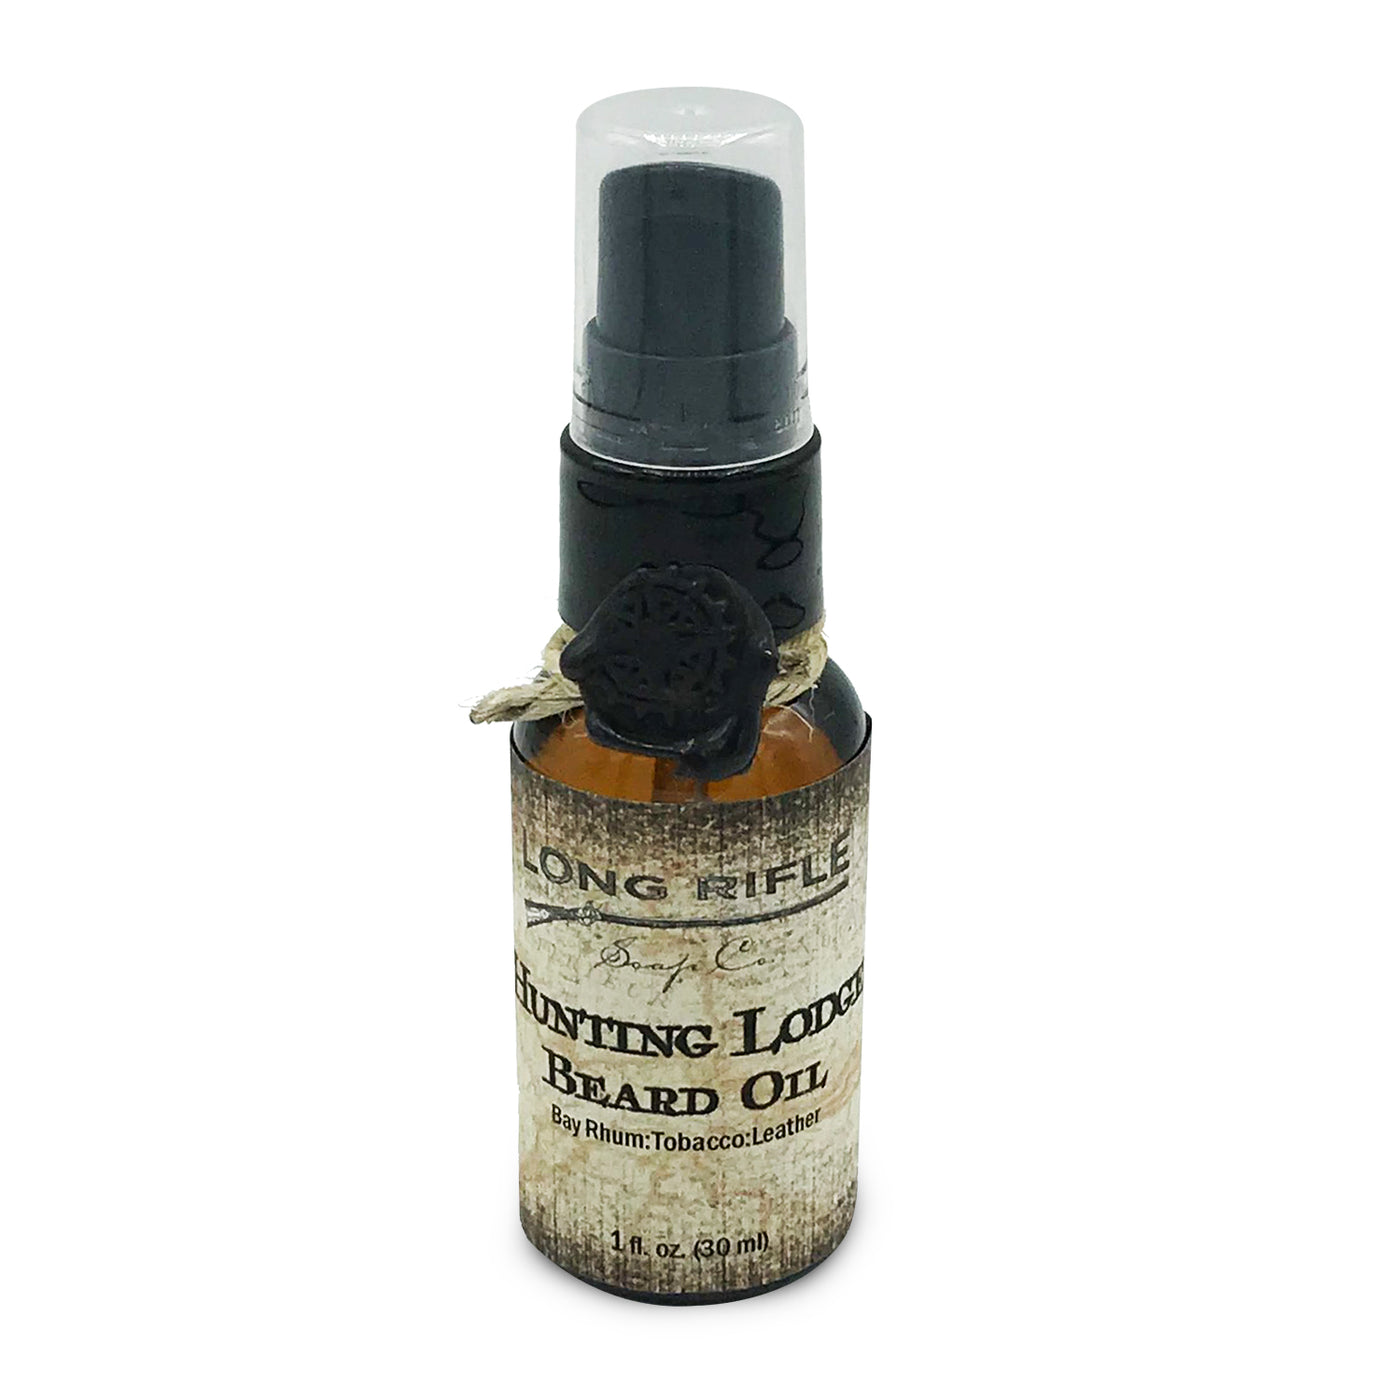  Hunting Lodge Beard Oil by Long Rifle sold by Naked Armor Razors